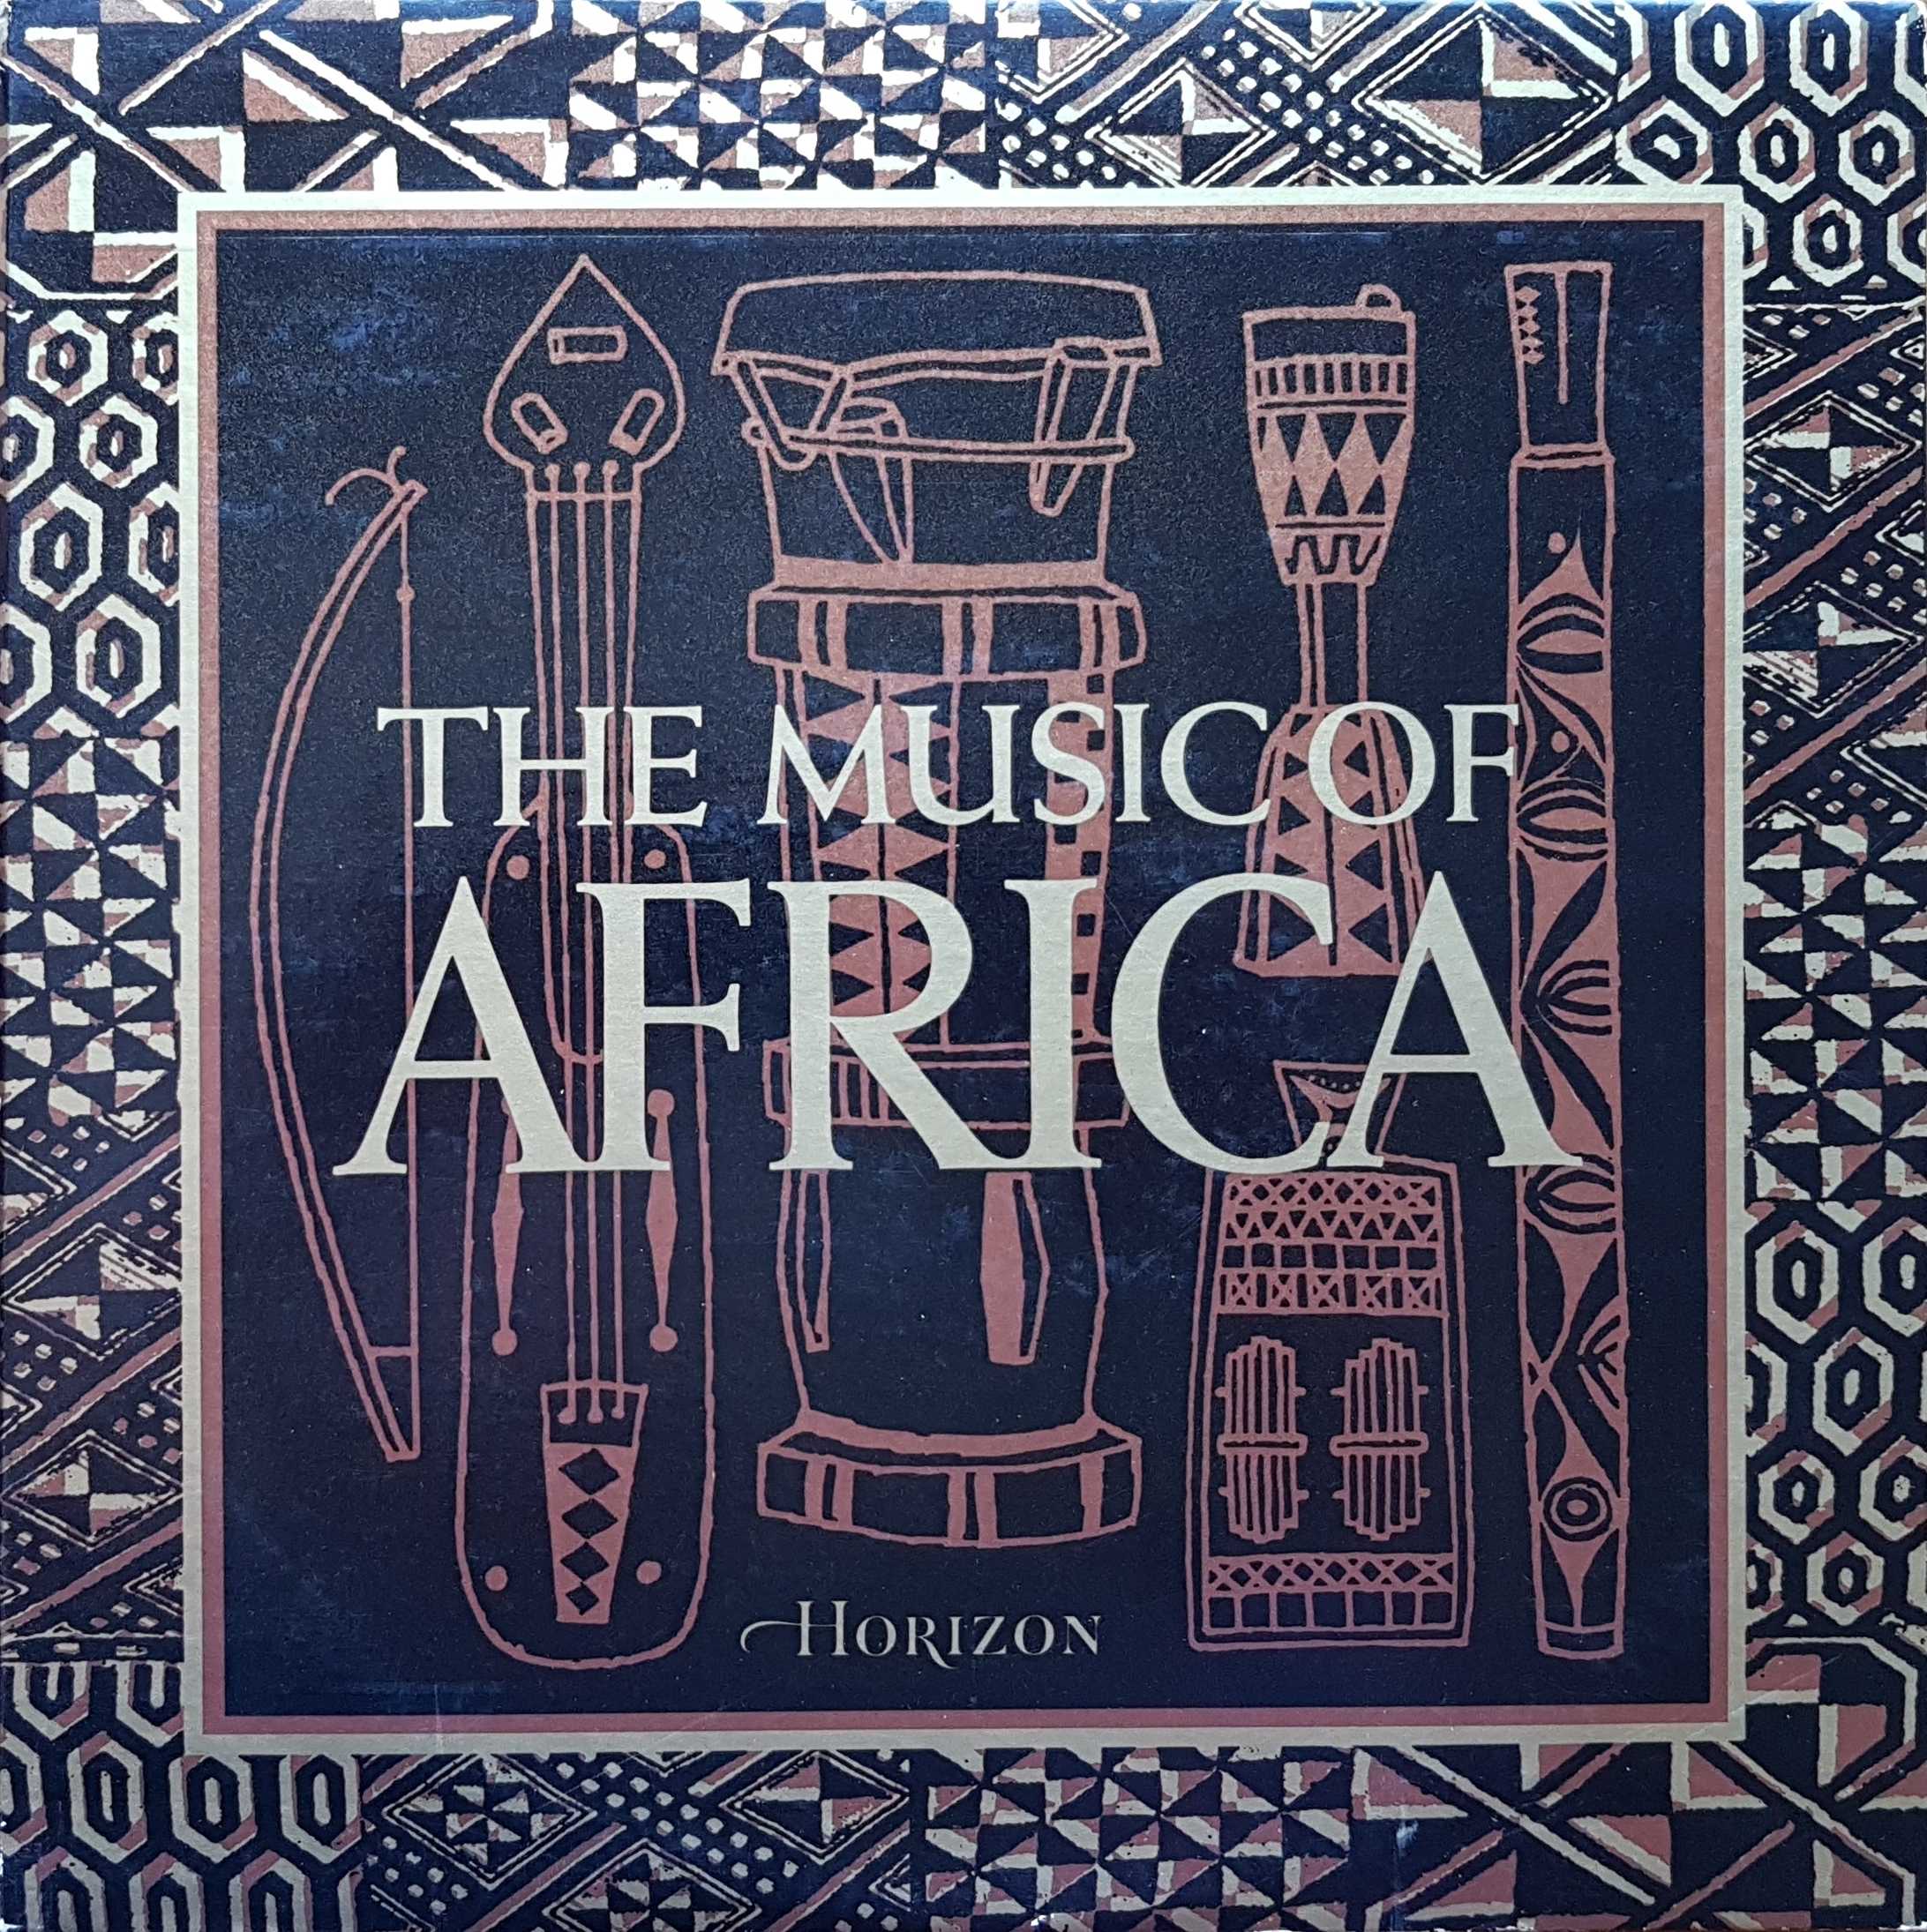 Picture of The music of Africa  by artist Various from the BBC albums - Records and Tapes library